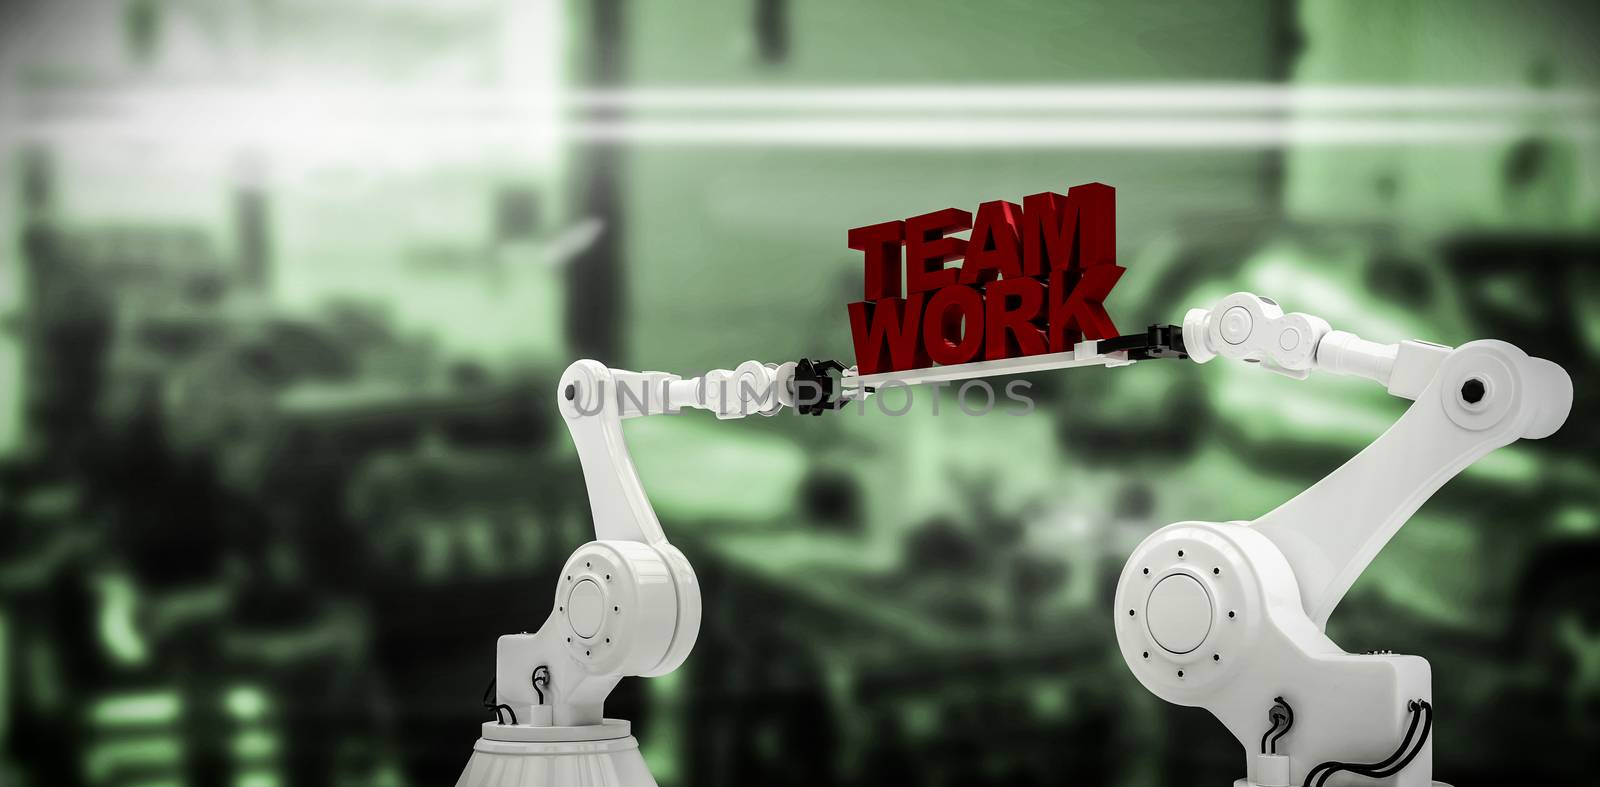 Mechanical hands holding team work message on white background against defocused image of industrial machinery